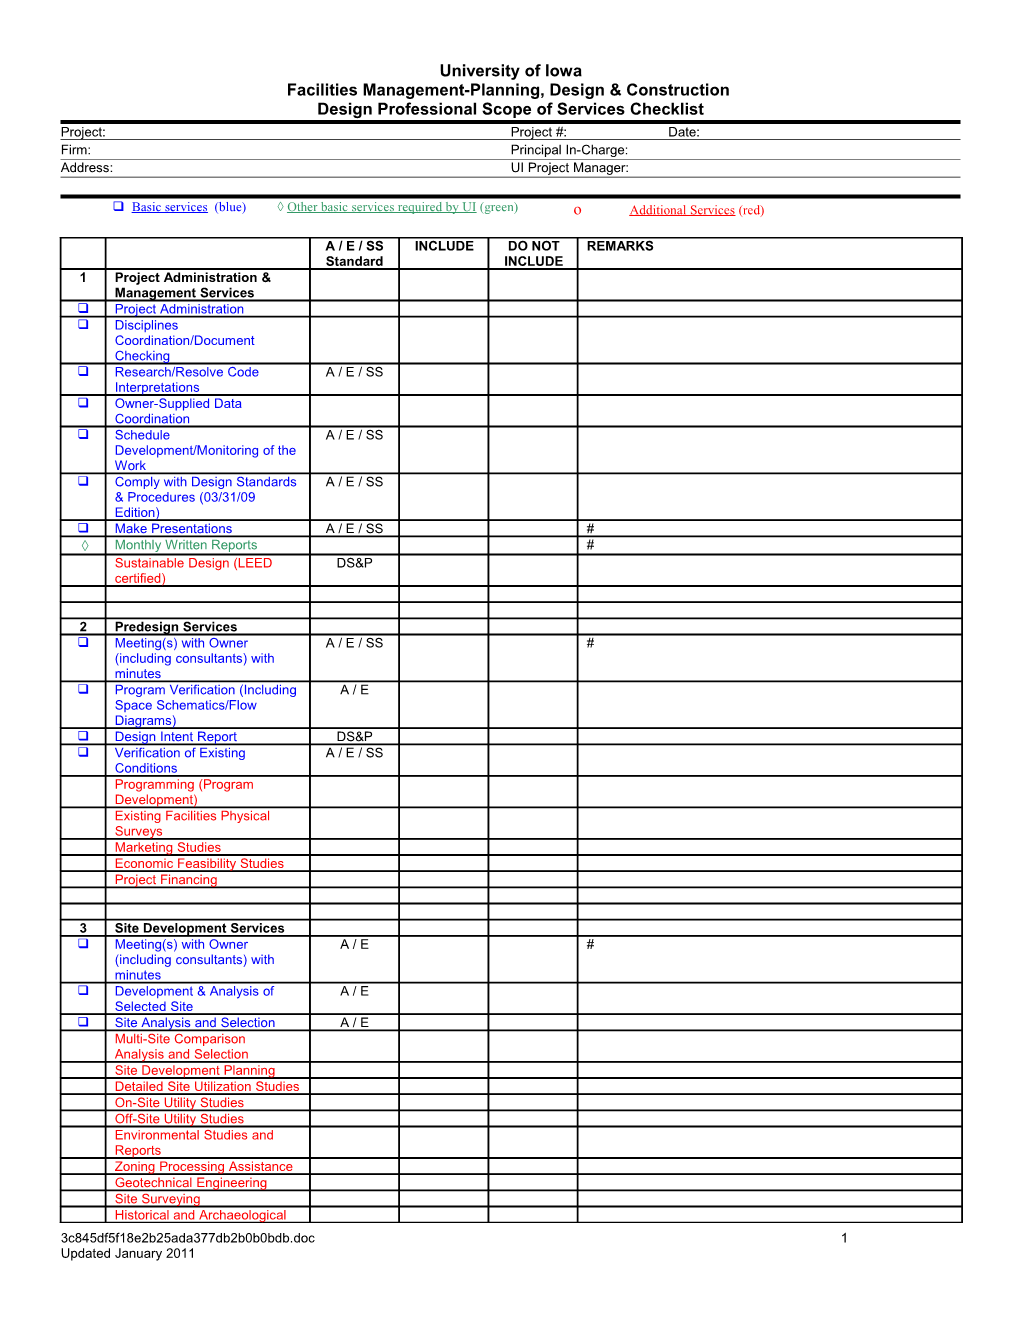 Completed Project Evaluation Form